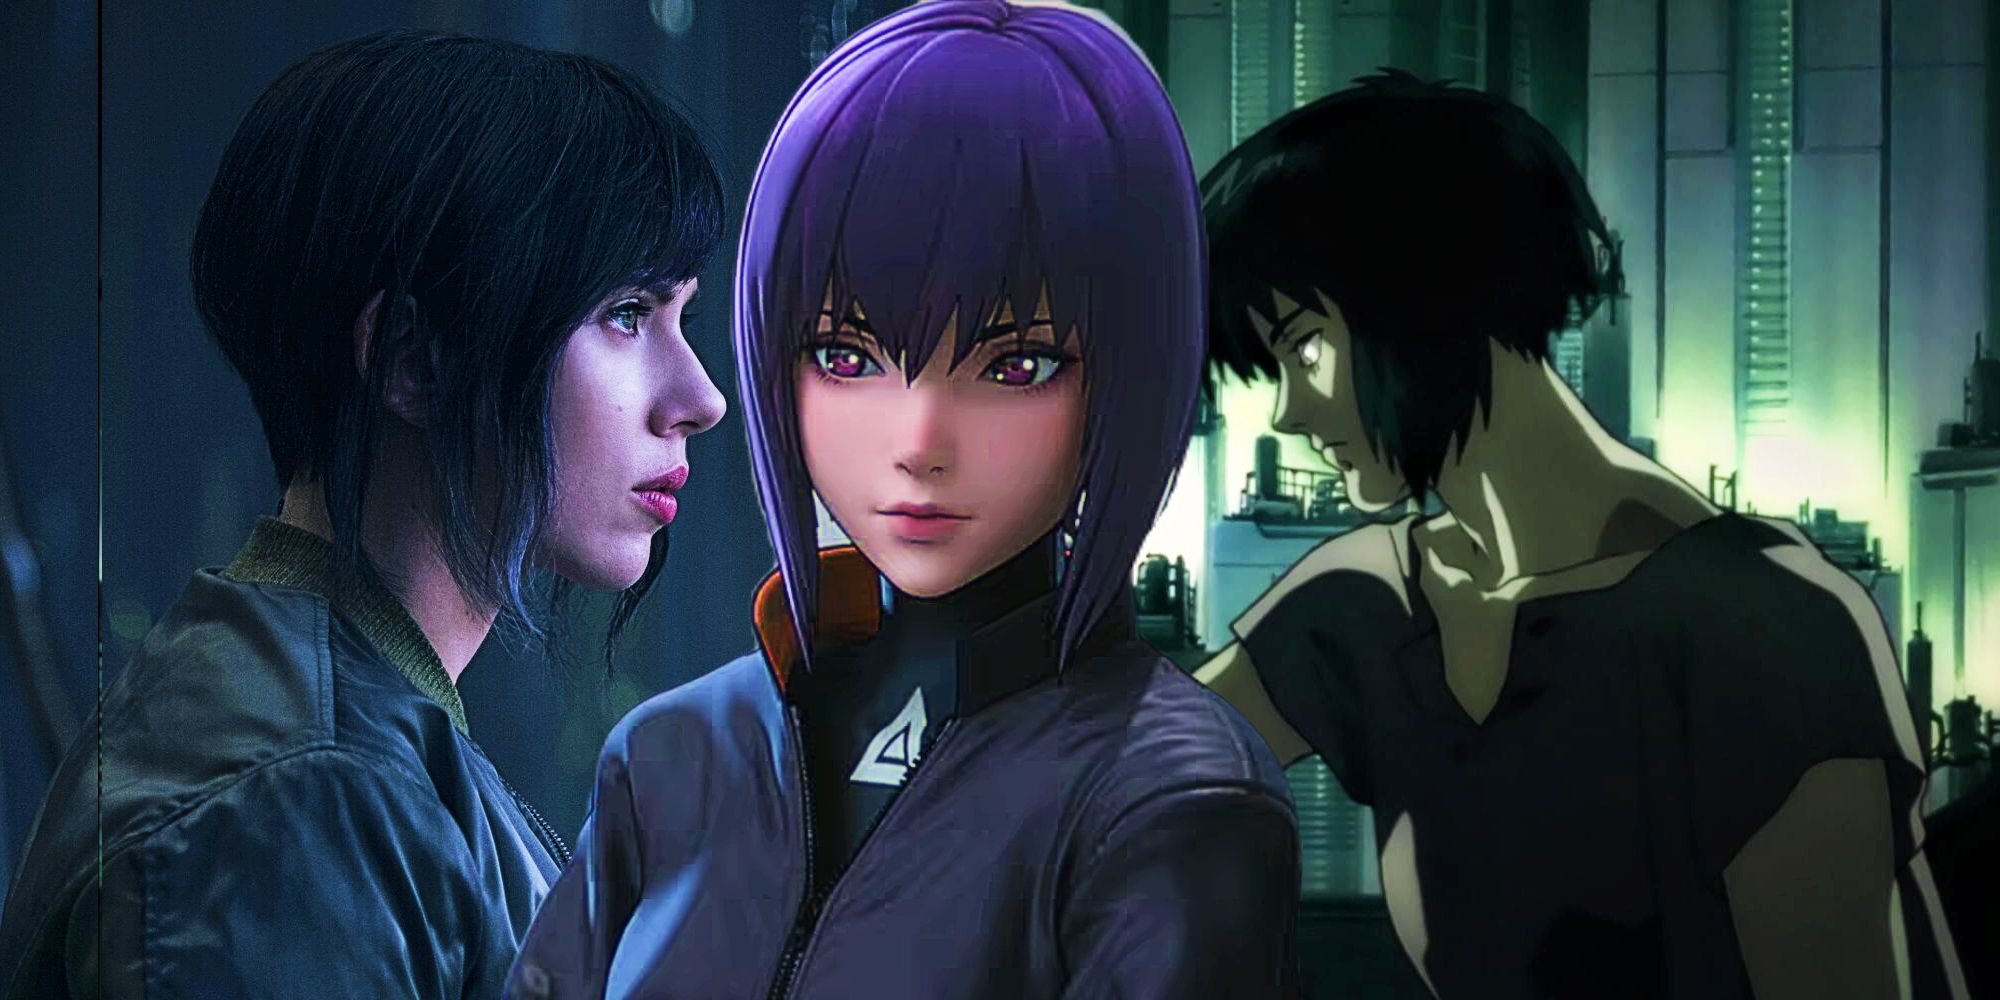 Every Ghost In The Shell Movie, Ranked From Worst To Best